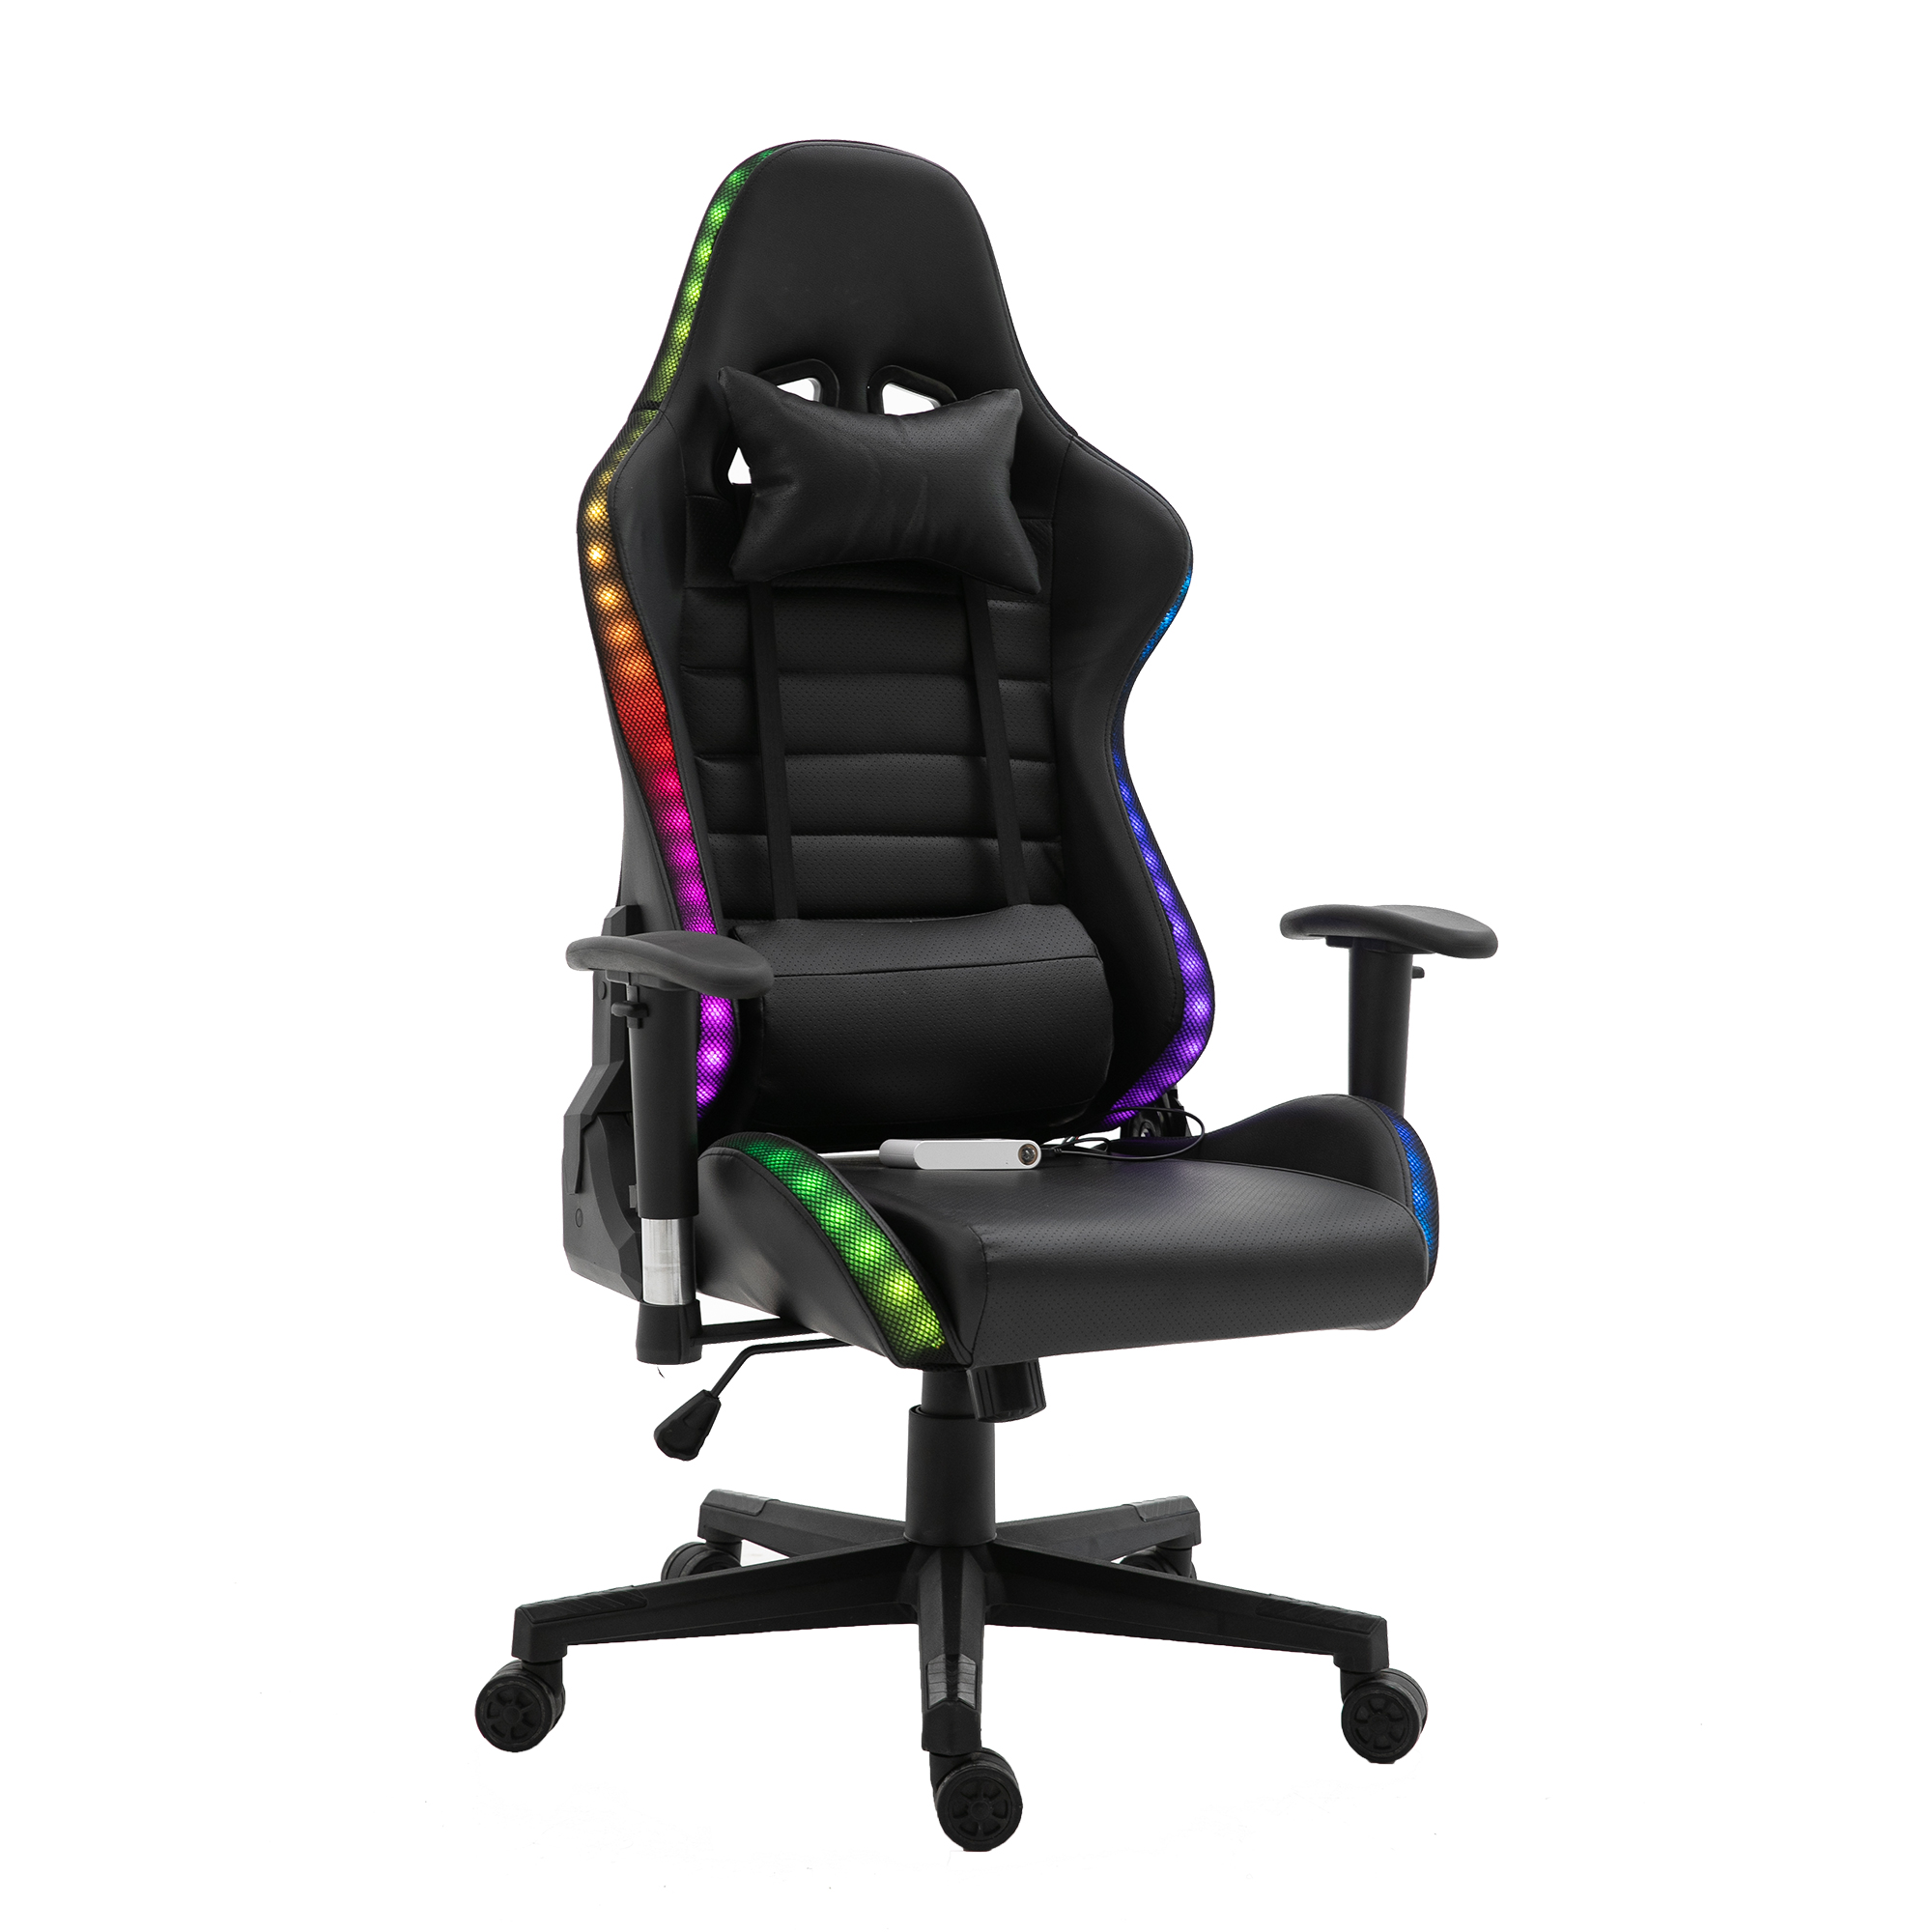 https://www.jifangfurniture.com/modern-wholesale-leather-recliner-gamer-chair-led-light-bar-racer-rgb-gaming-chair-product/